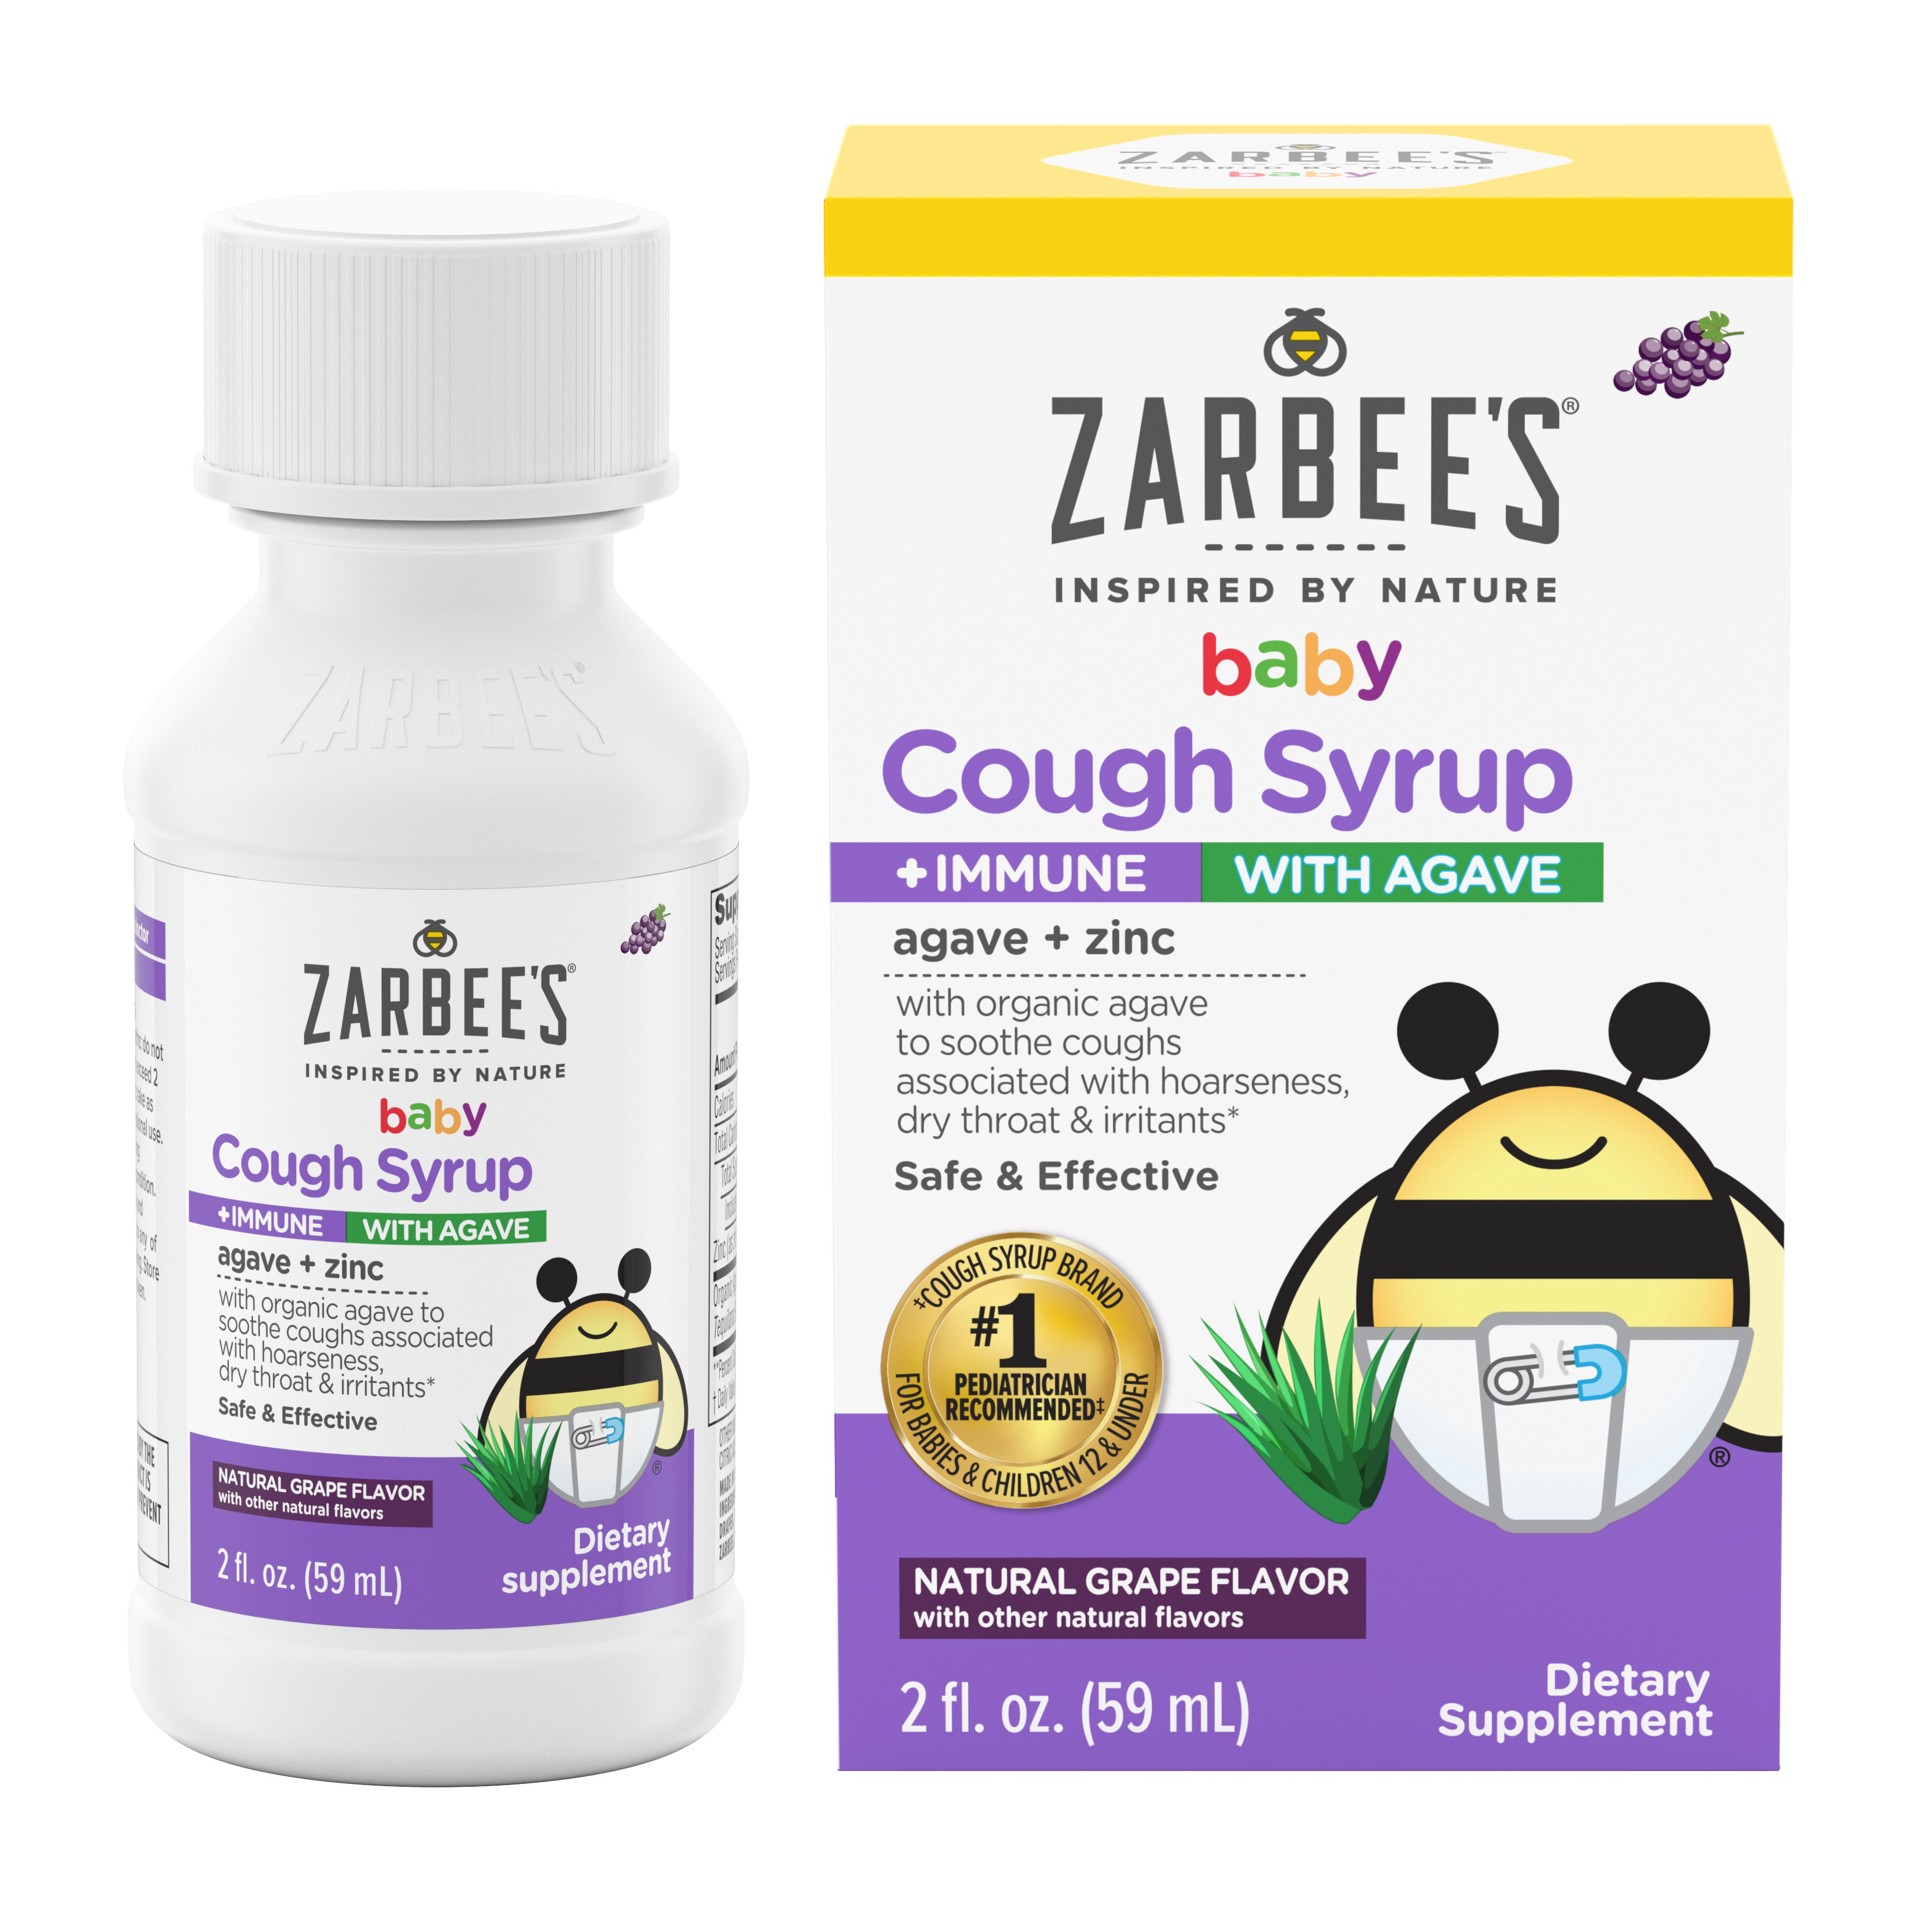 slide 2 of 5, Zarbee's Naturals Zarbee's Baby Cough Syrup + Immune with Organic Agave & Zinc - Natural Grape Flavor - 2 fl oz, 2 fl oz